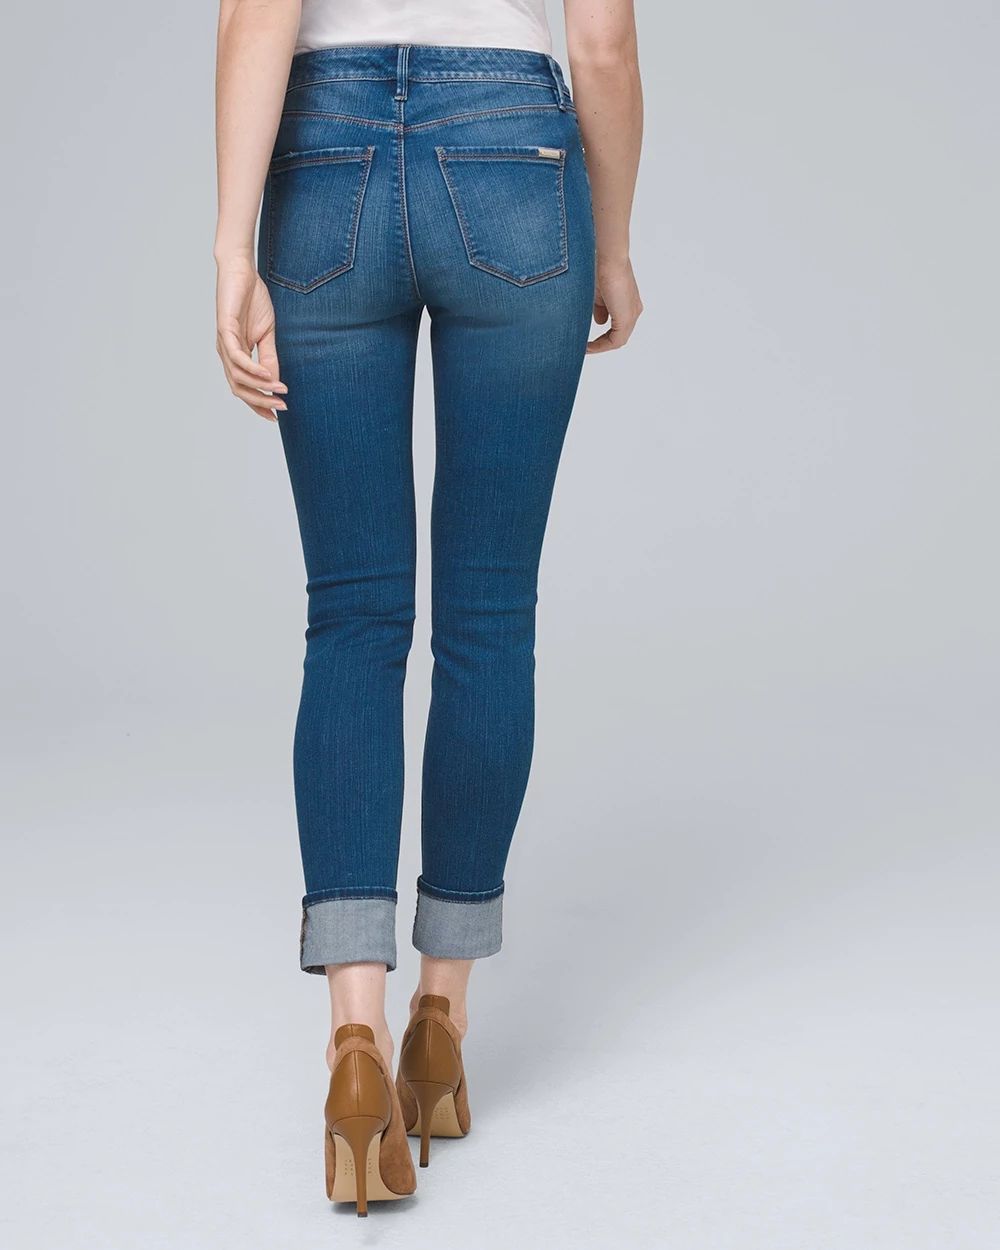 Mid-Rise Destructed Skinny Ankle Jeans click to view larger image.